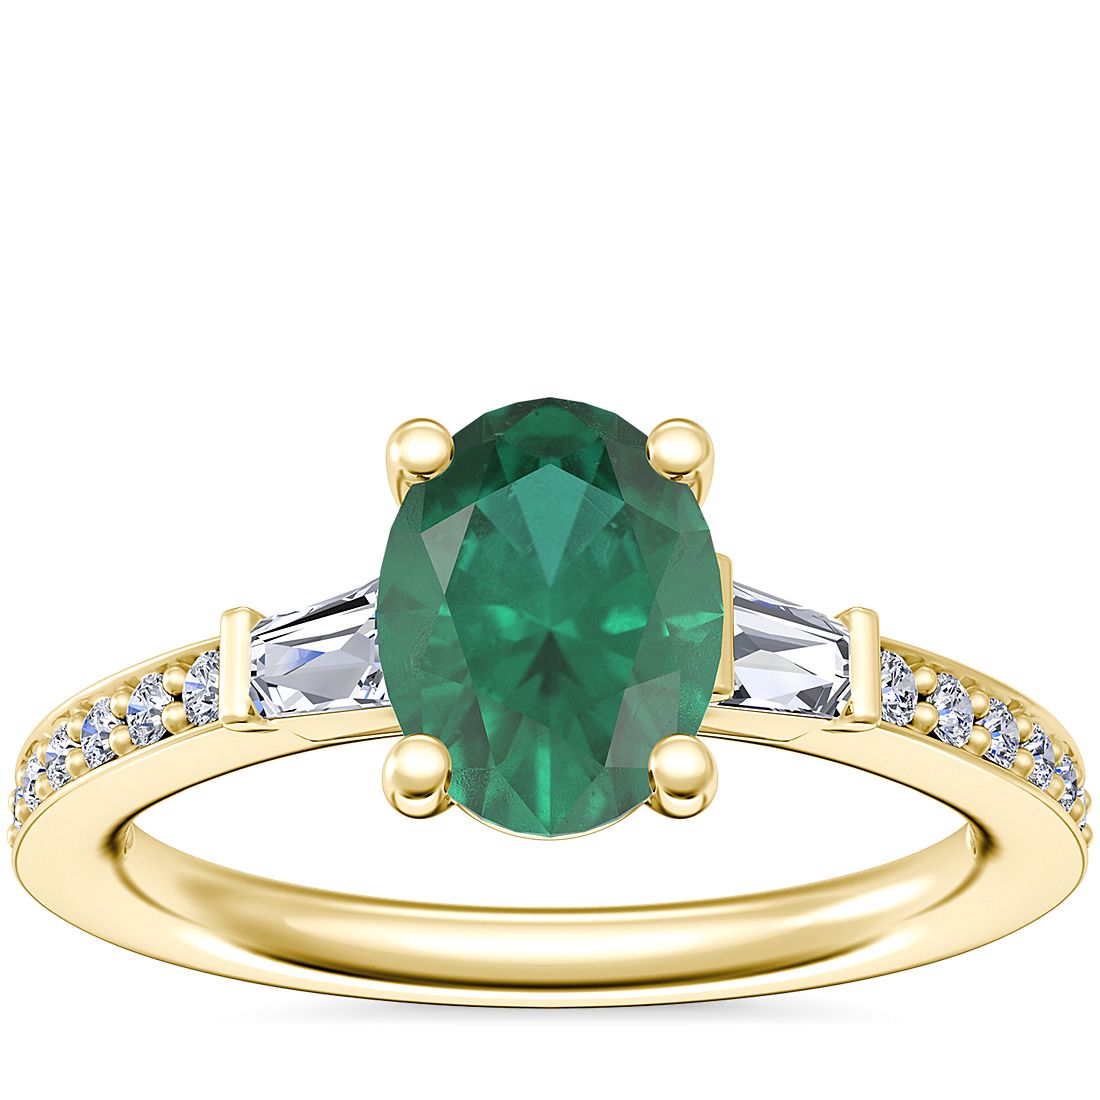 Tapered Baguette Diamond Cathedral Engagement Ring with Oval Emerald in 14k Yellow Gold (8x6mm)